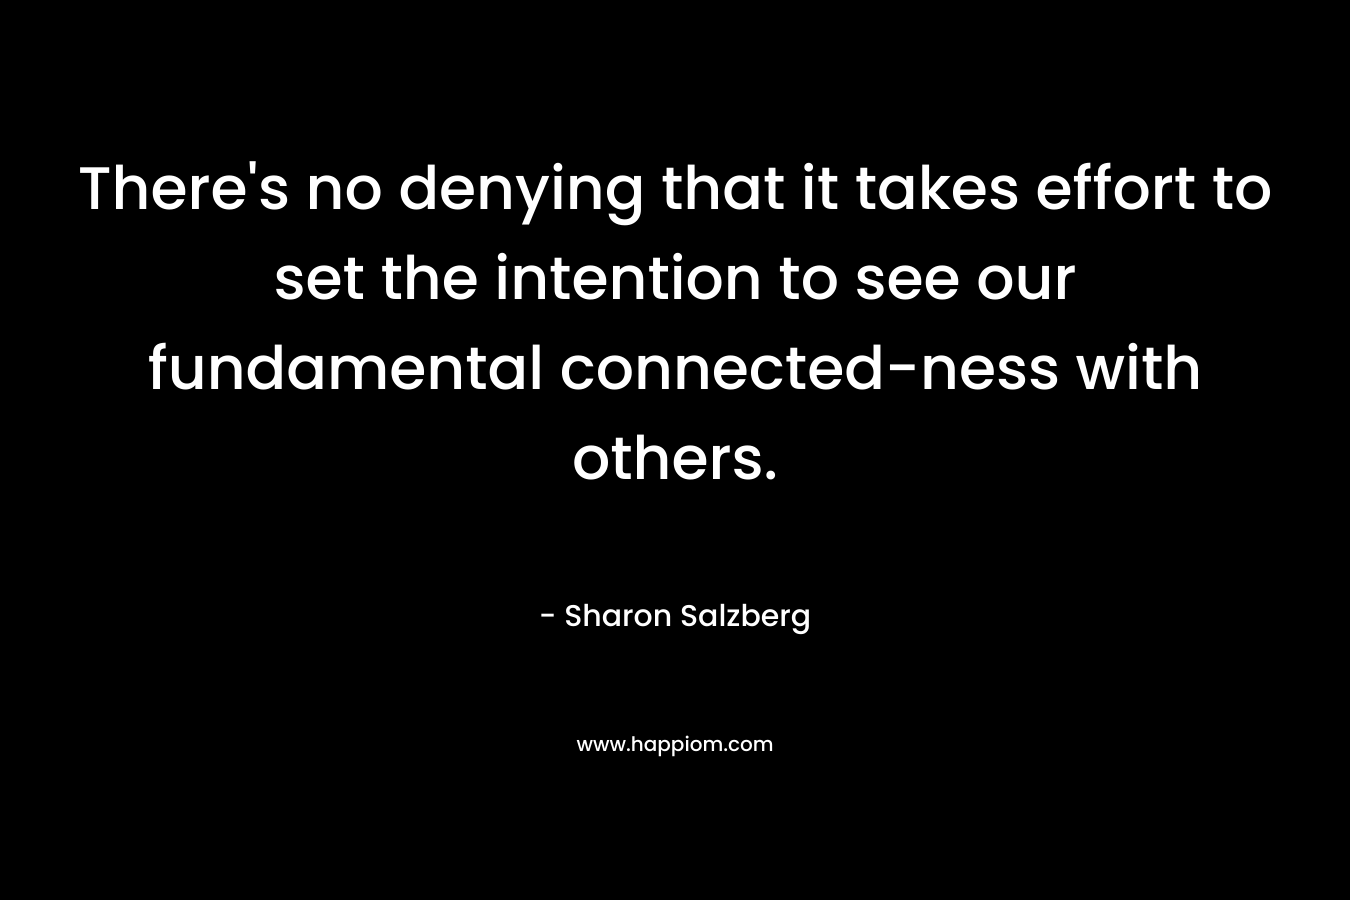 There’s no denying that it takes effort to set the intention to see our fundamental connected-ness with others. – Sharon Salzberg